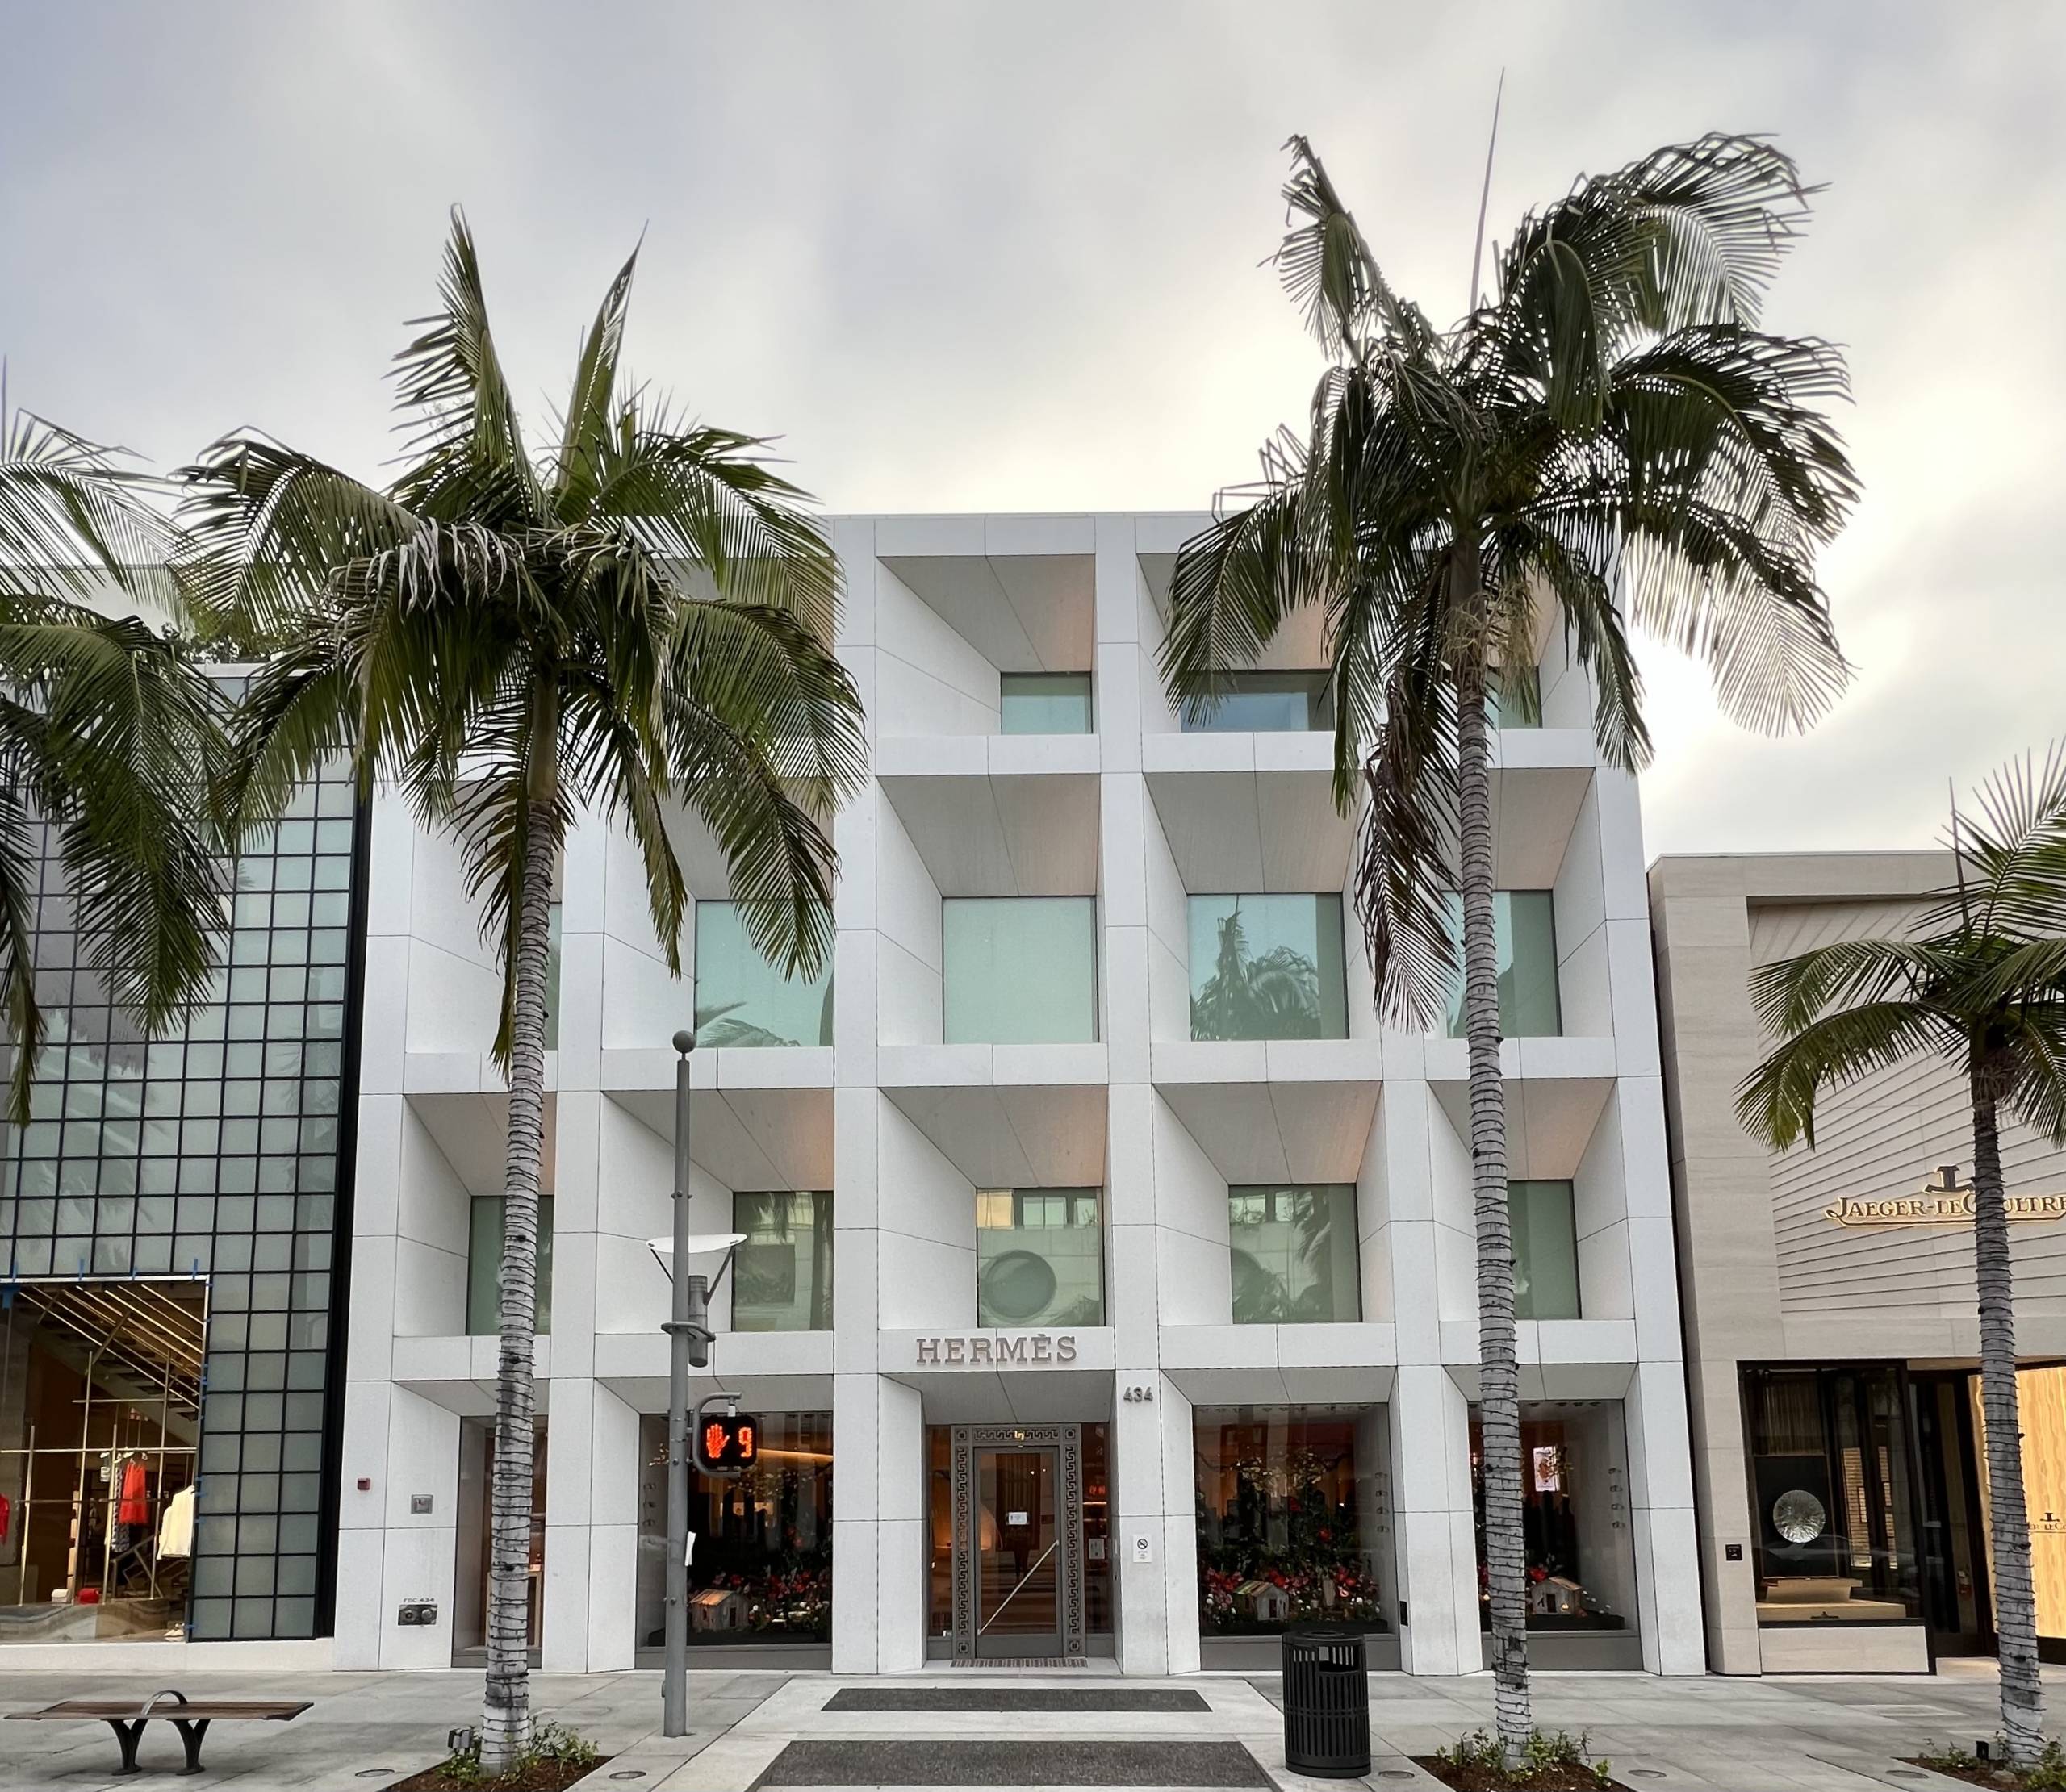 Is Louis Vuitton Moët Hennessy Trying to Take Over Rodeo Drive? - PurseBop